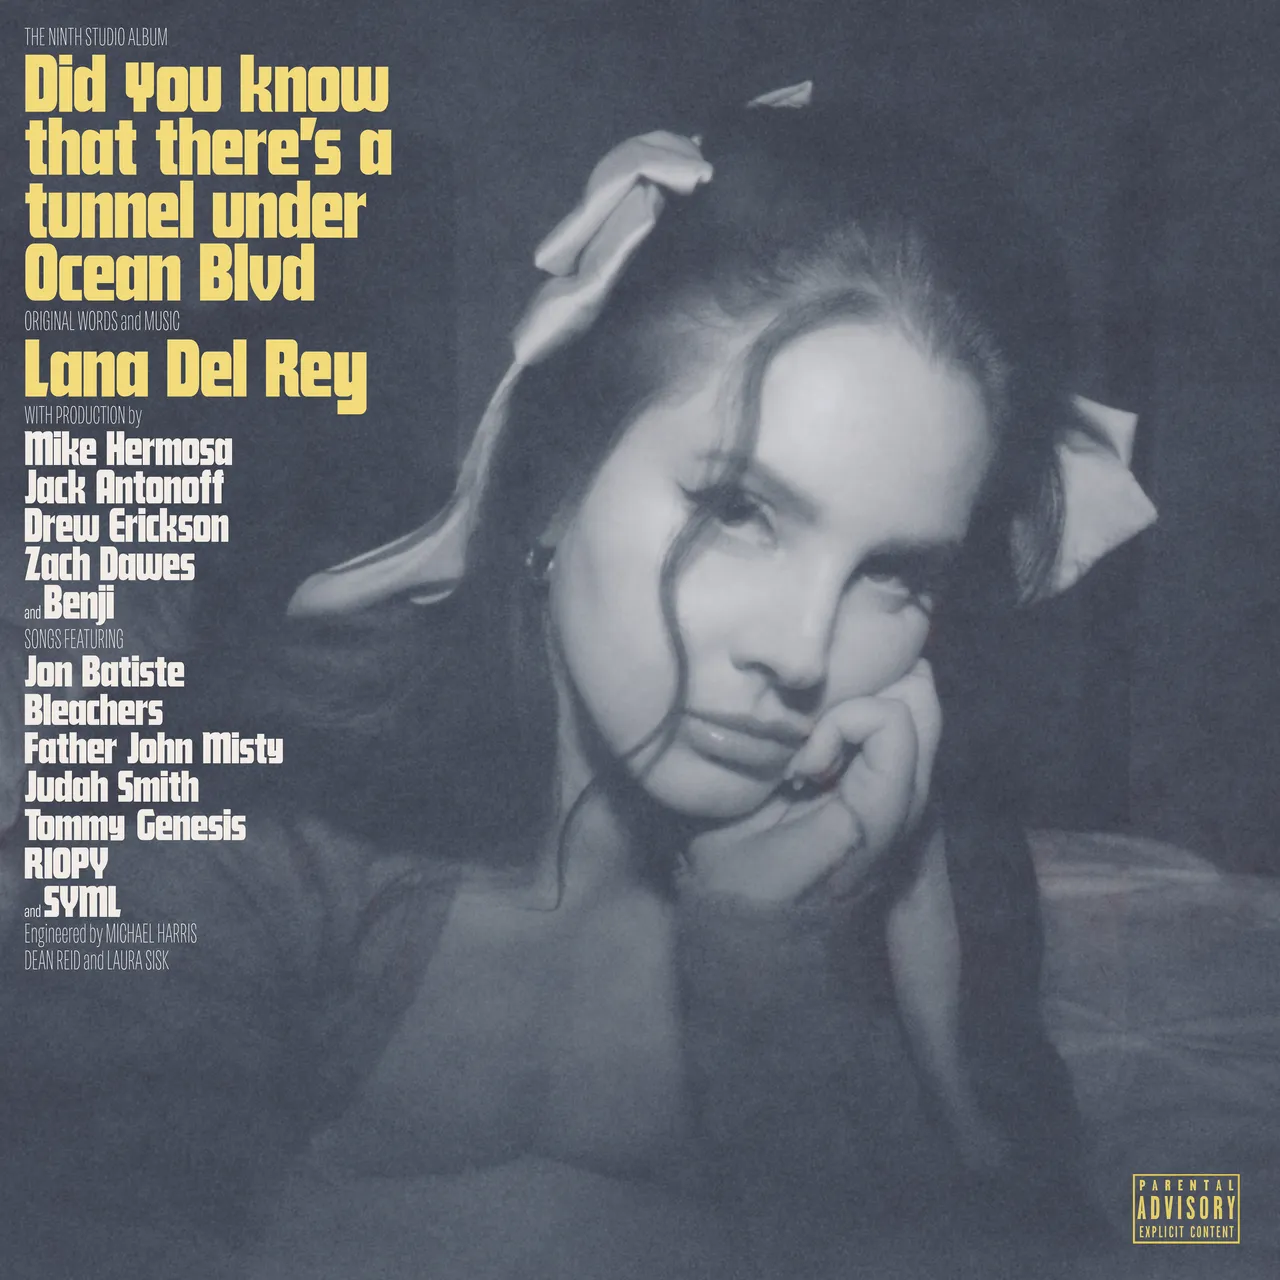 Recensione Lana Del Rey - Did You Know That There's A Tunnel Under Ocean Blvd